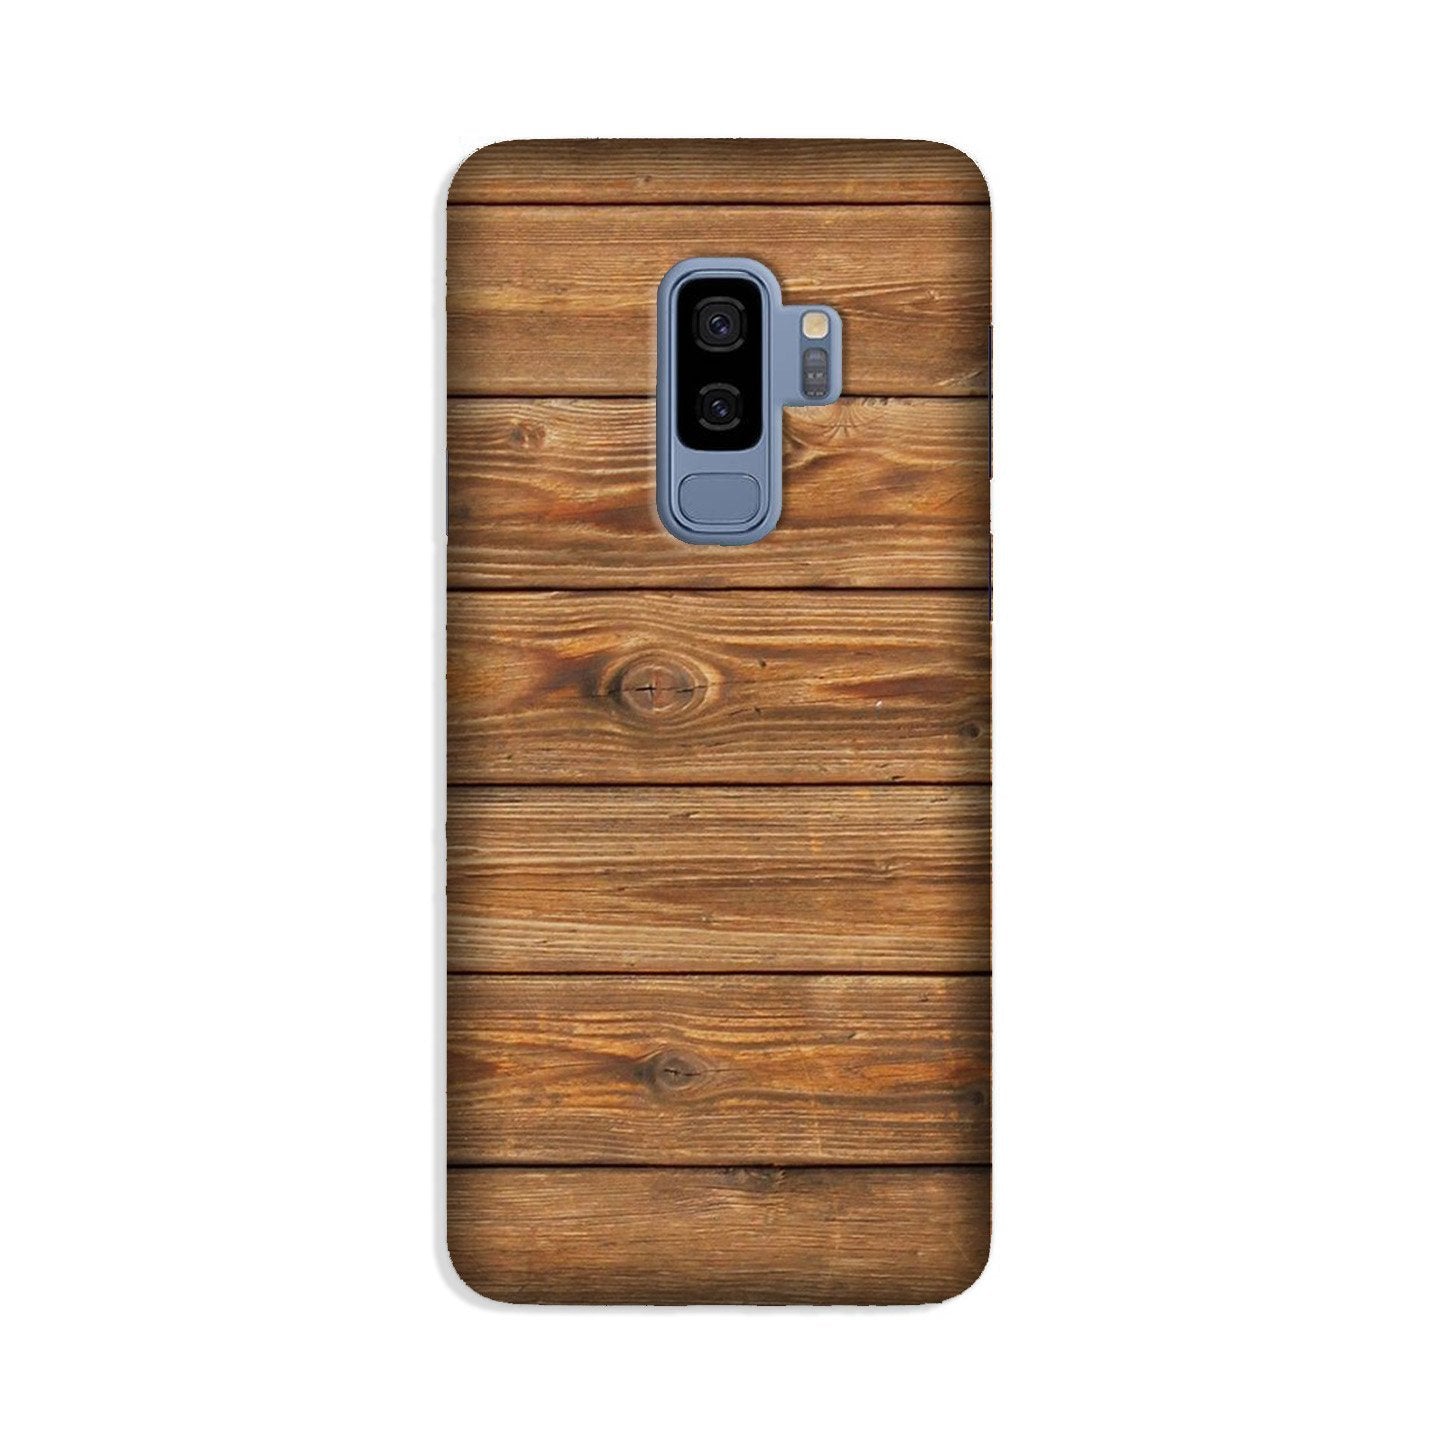 Wooden Look Case for Galaxy S9 Plus(Design - 113)